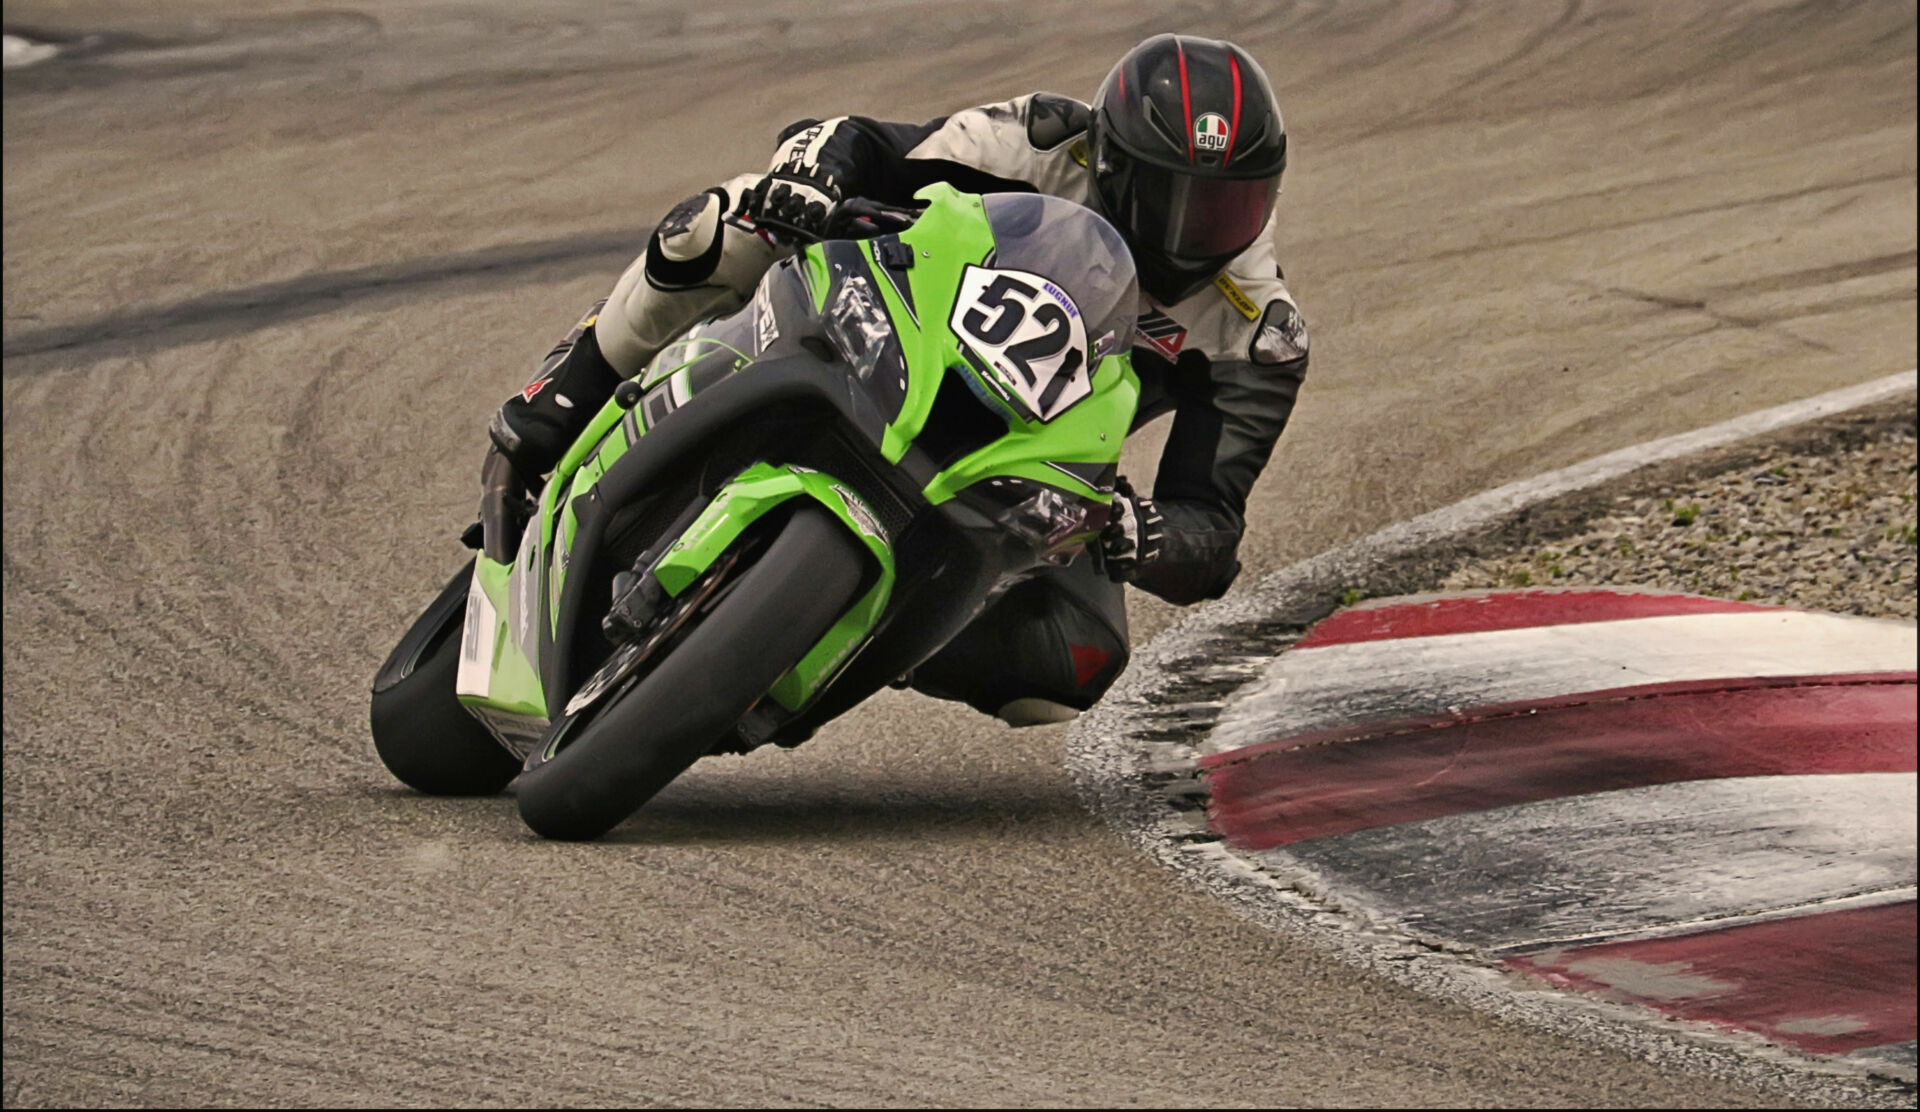 Anthony Norton (521) blasts his way out of The Attitudes turn complex during Round 3 of the UtahSBA’s King of the Mountain Race held at Utah Motorsports Campus’ East Track. Photo by Steve Midgley, courtesy UtahSBA.